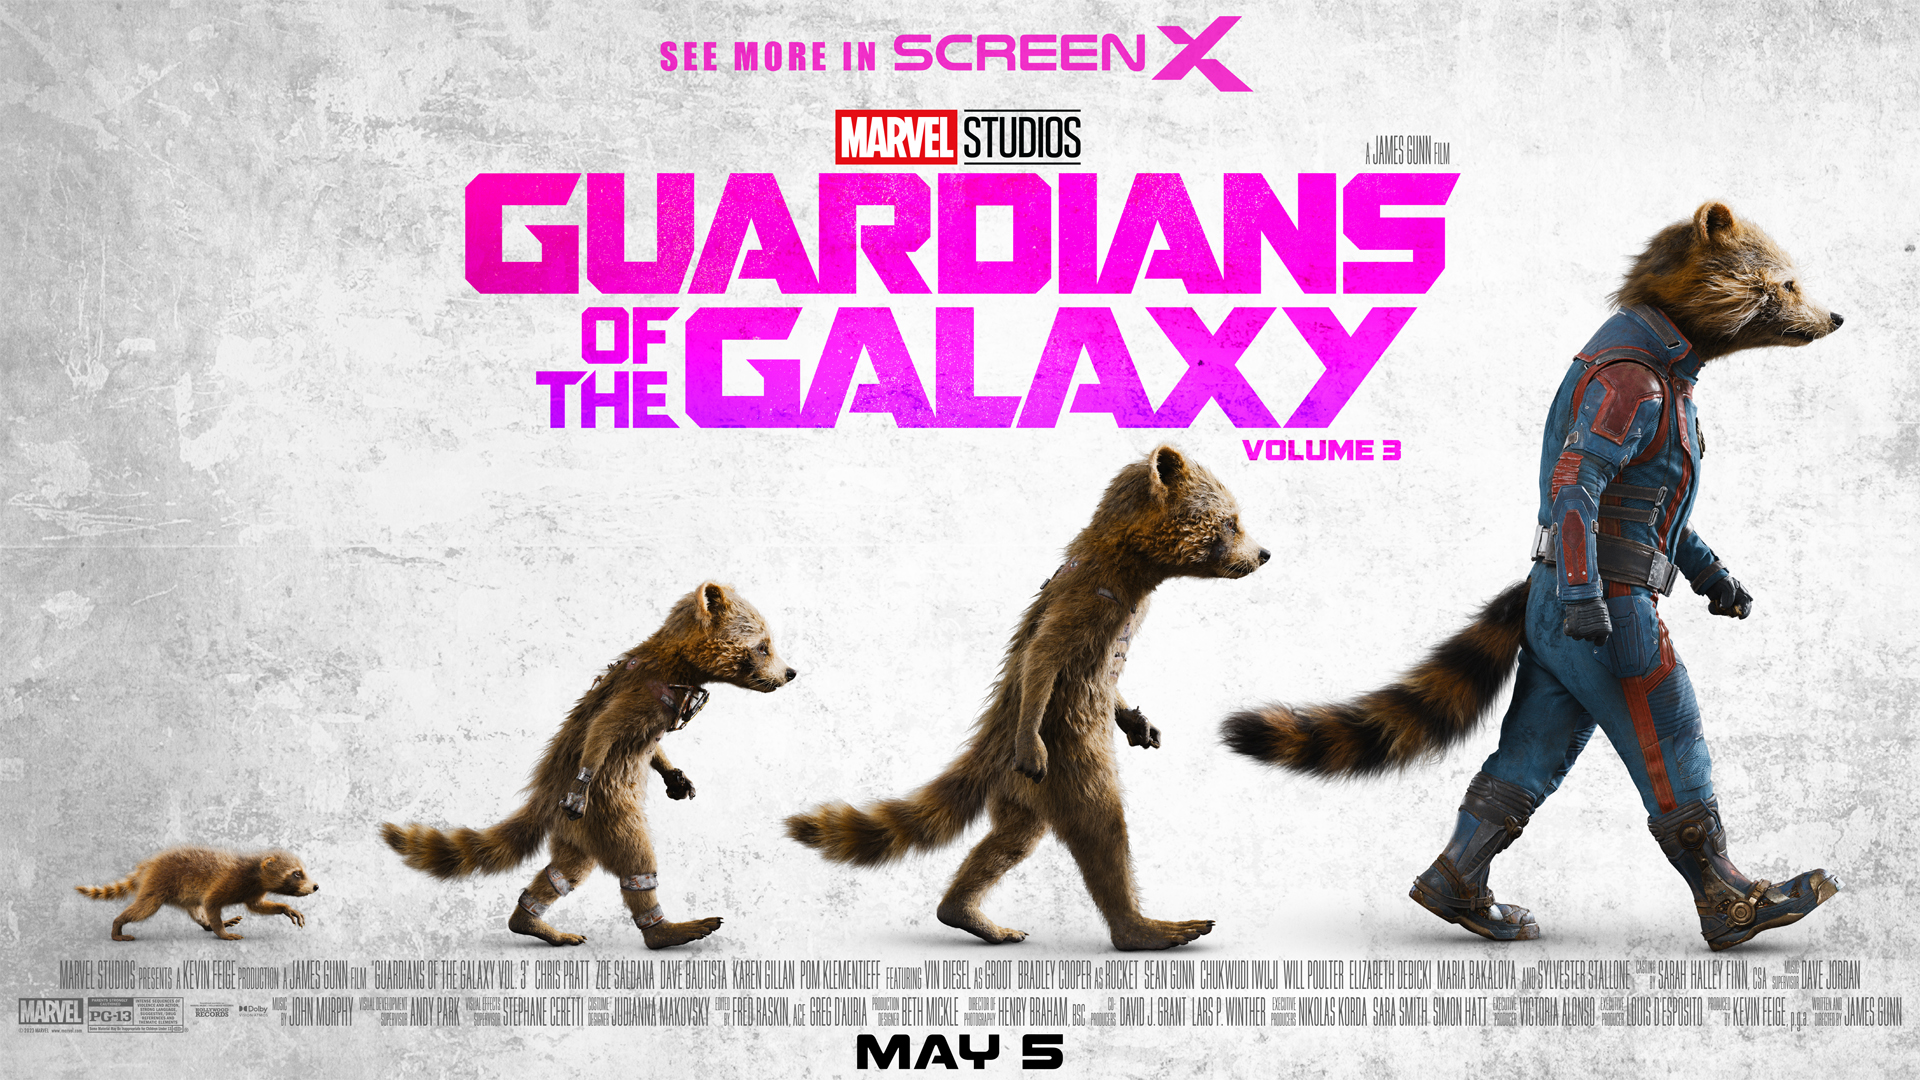 Regal Guardians Of The Galaxy Vol. 3 In #ScreenX And Get This Free Mini Poster On Opening Weekend. Only At Participating Locations While Supplies Last